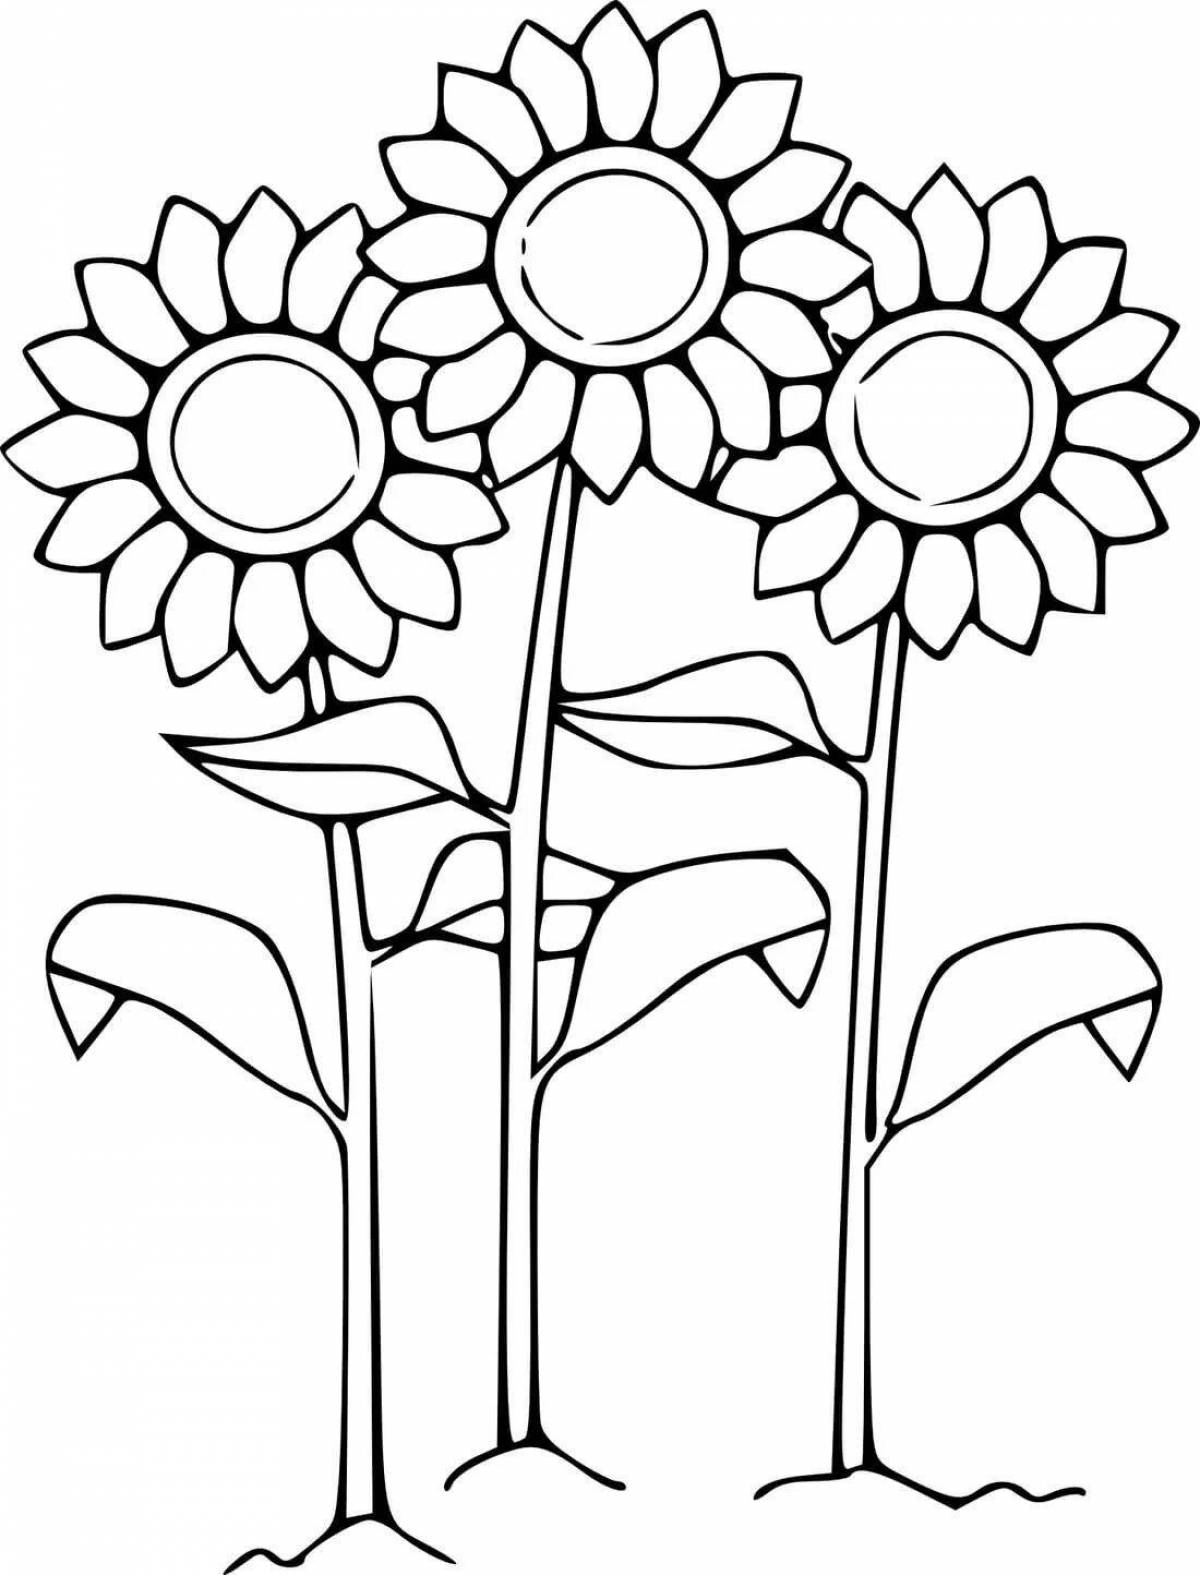 Fun coloring book sunflowers for kids 2-3 years old